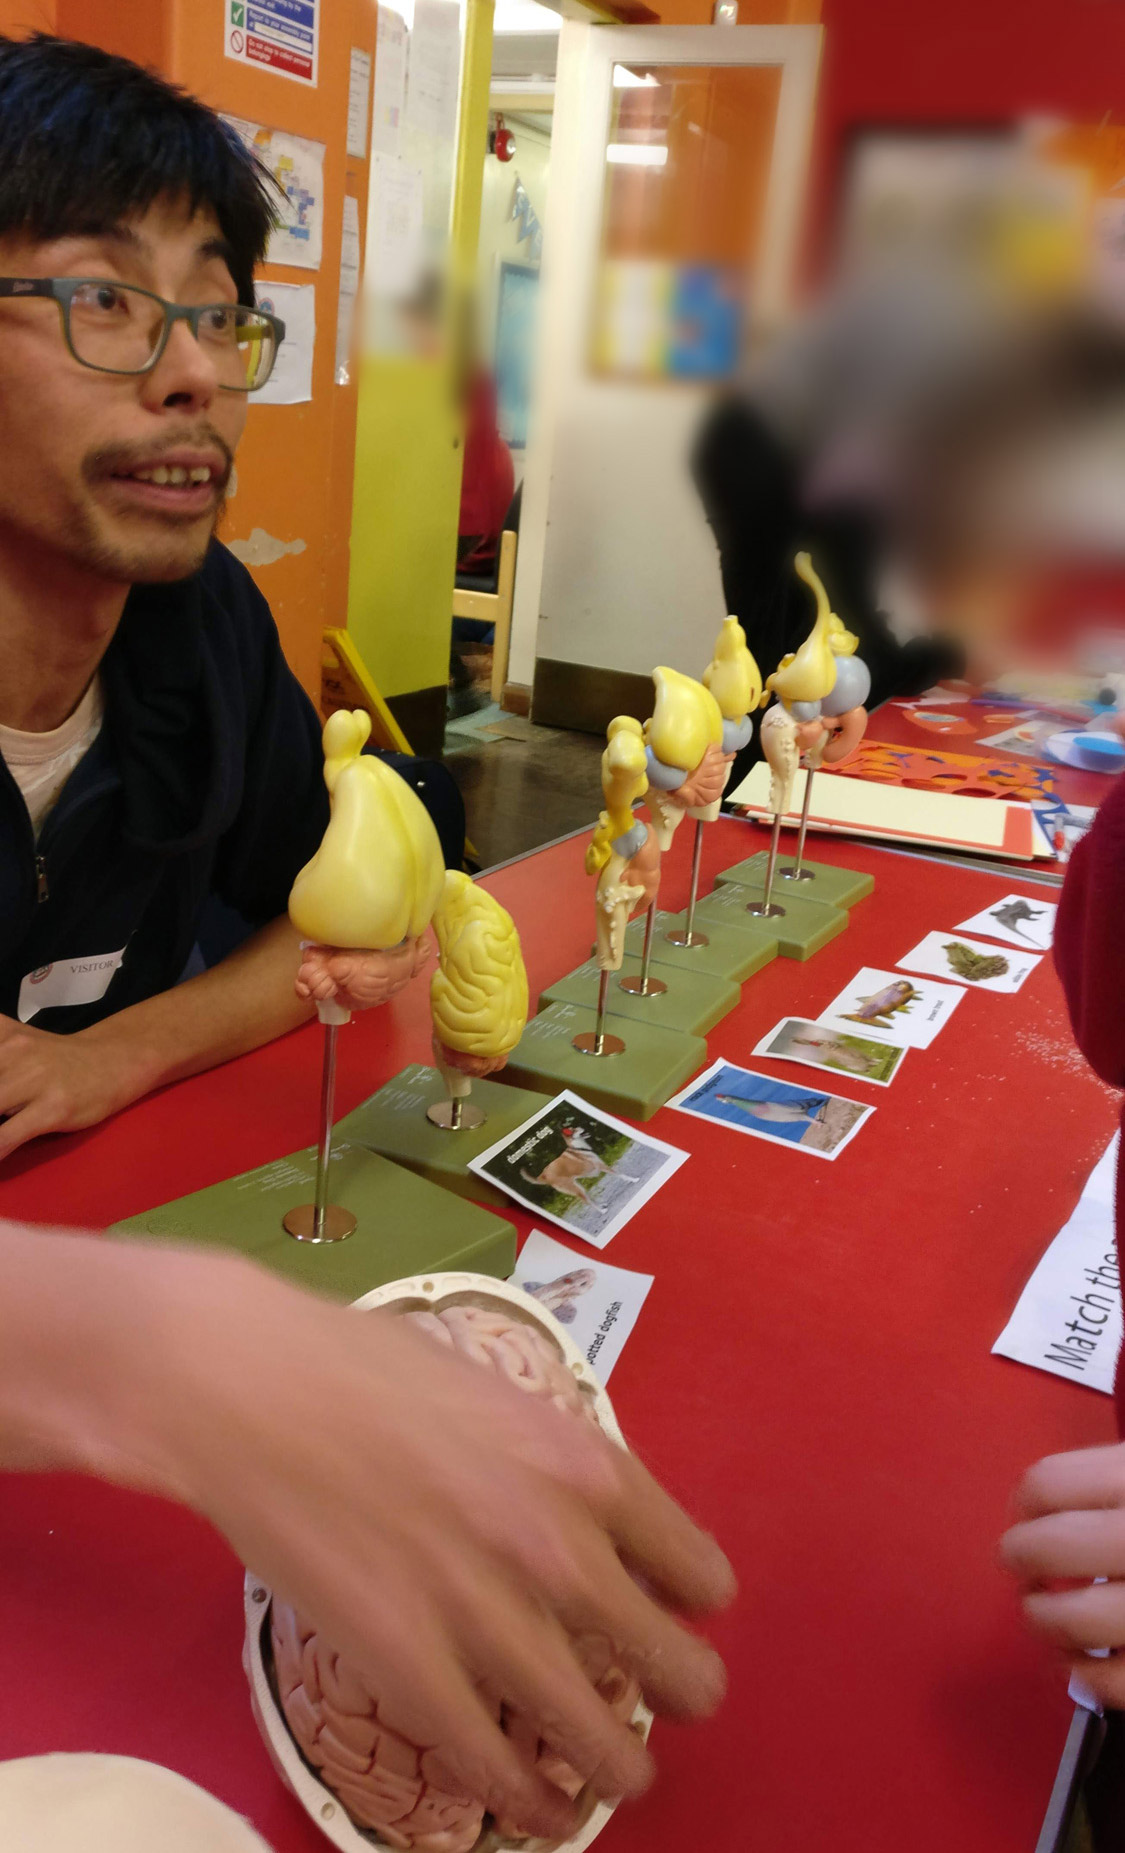 Kouichi at the Science Fair; as well as matching vertebrate brains to photos, children explored the human brain model.